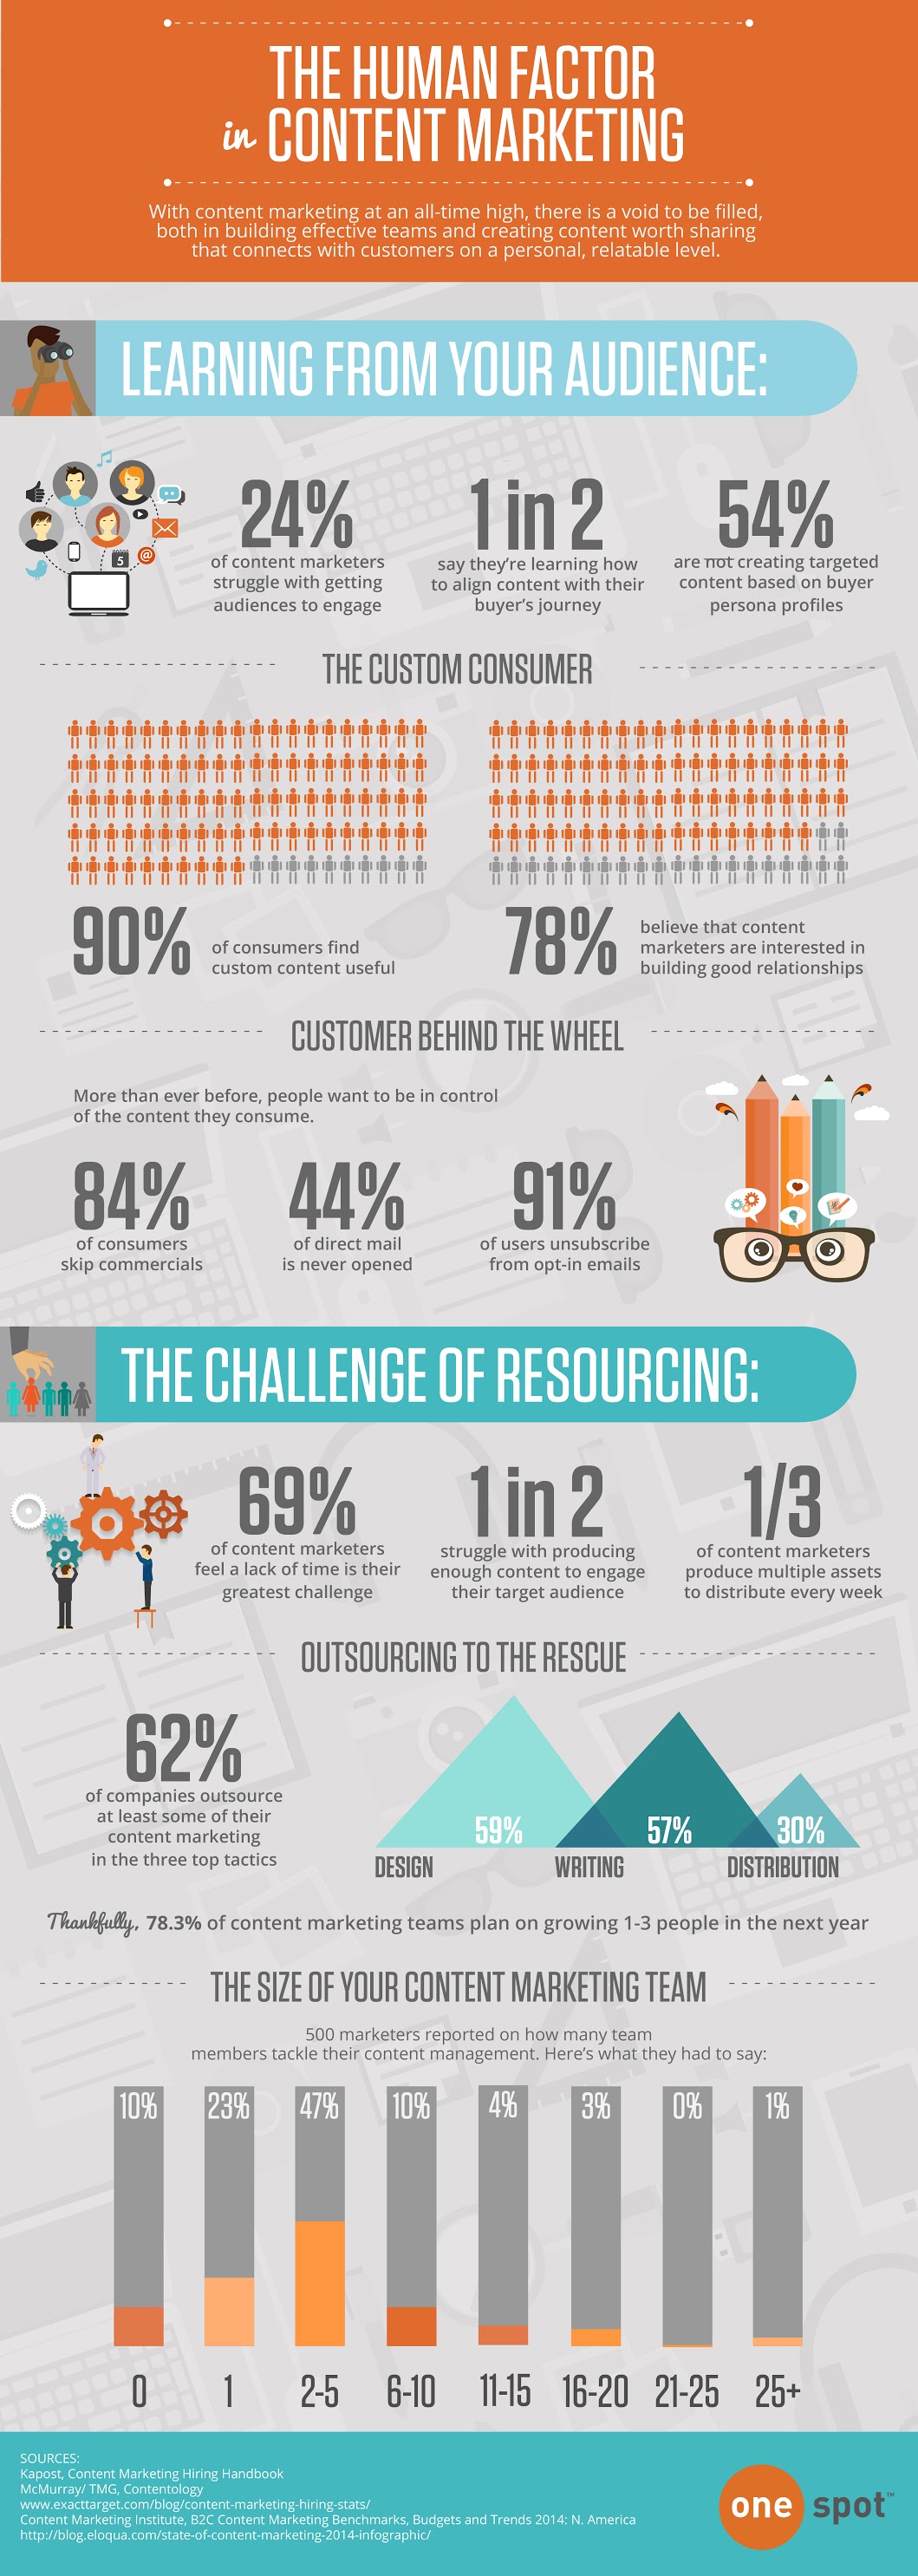 The Human Factor in #ContentMarketing - #infographic